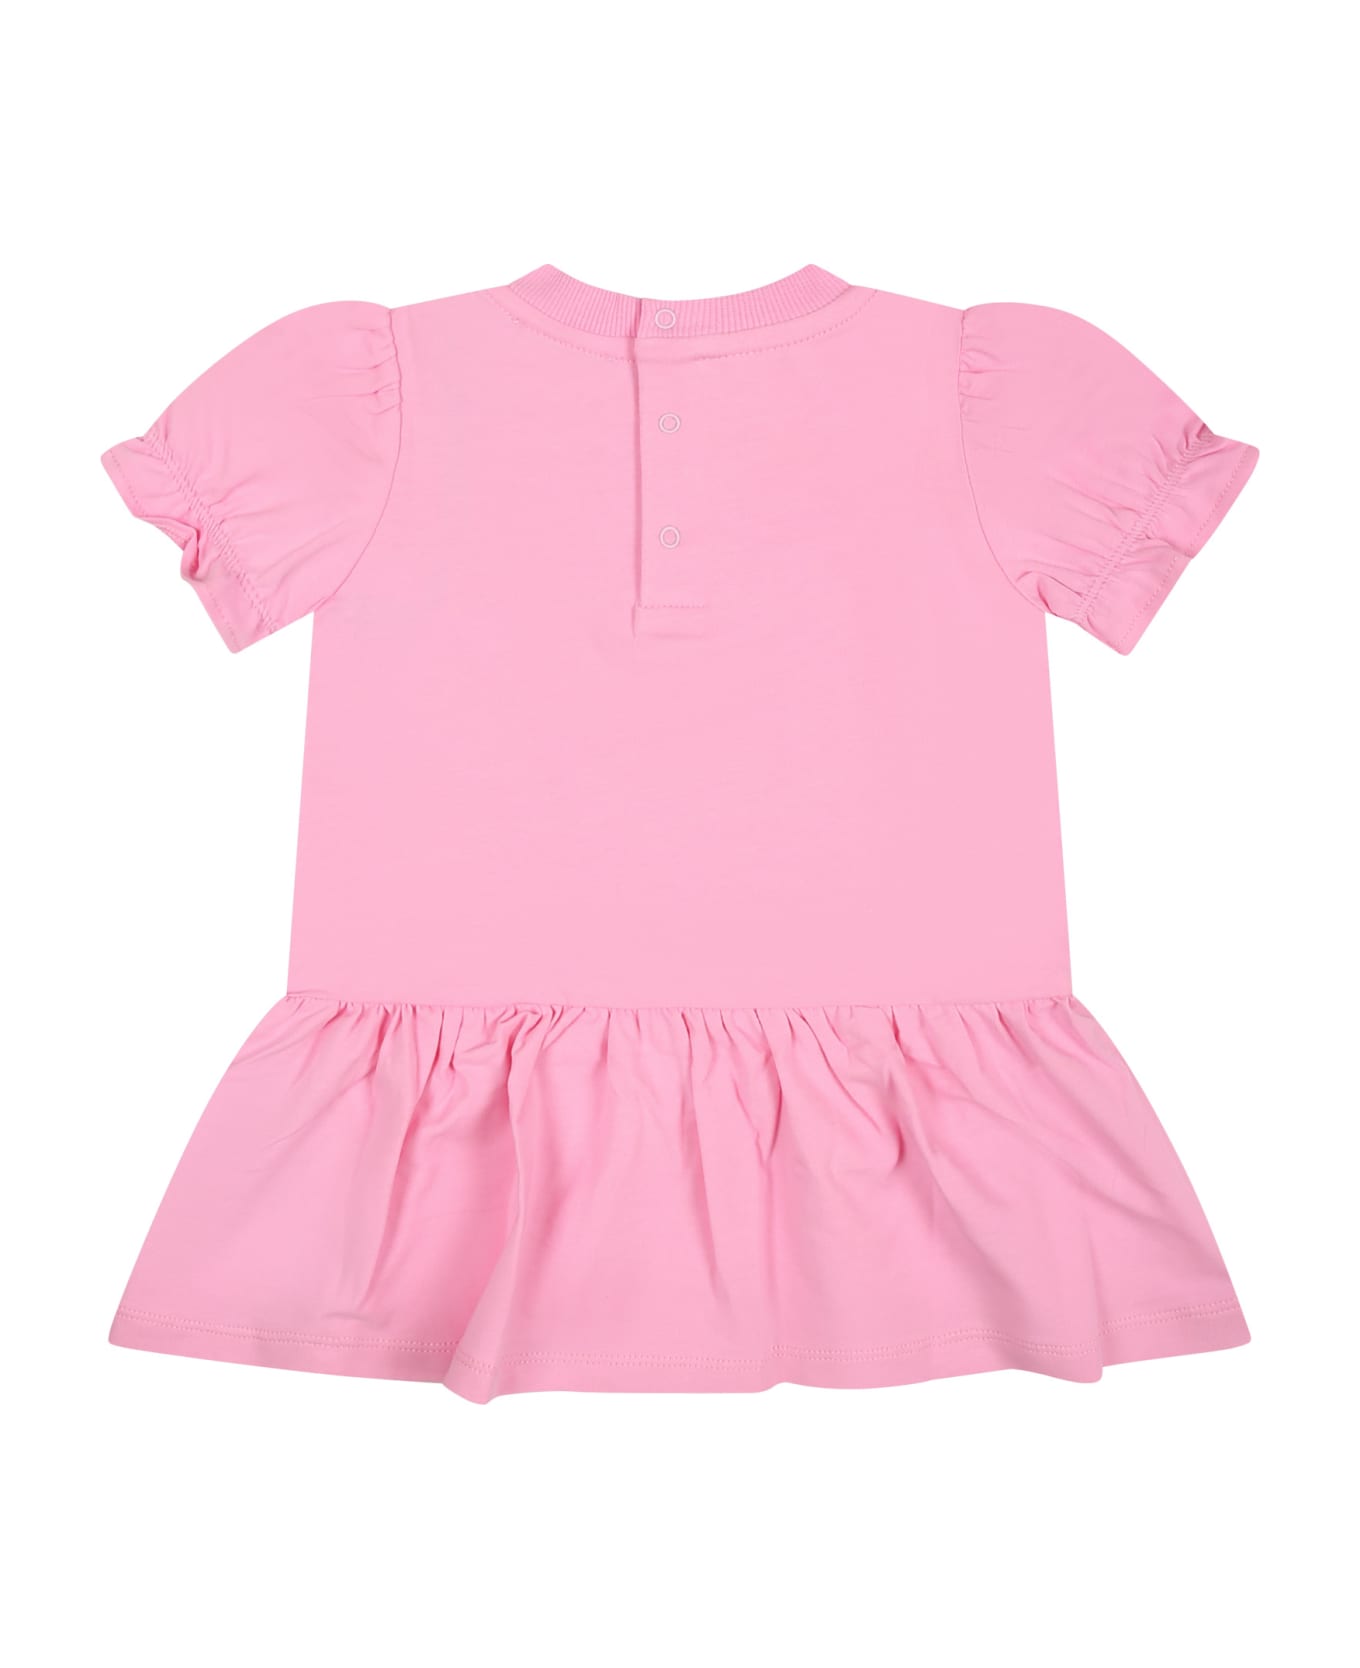 Moschino Pink Dress For Baby Girl With Teddy Bear Print - Pink